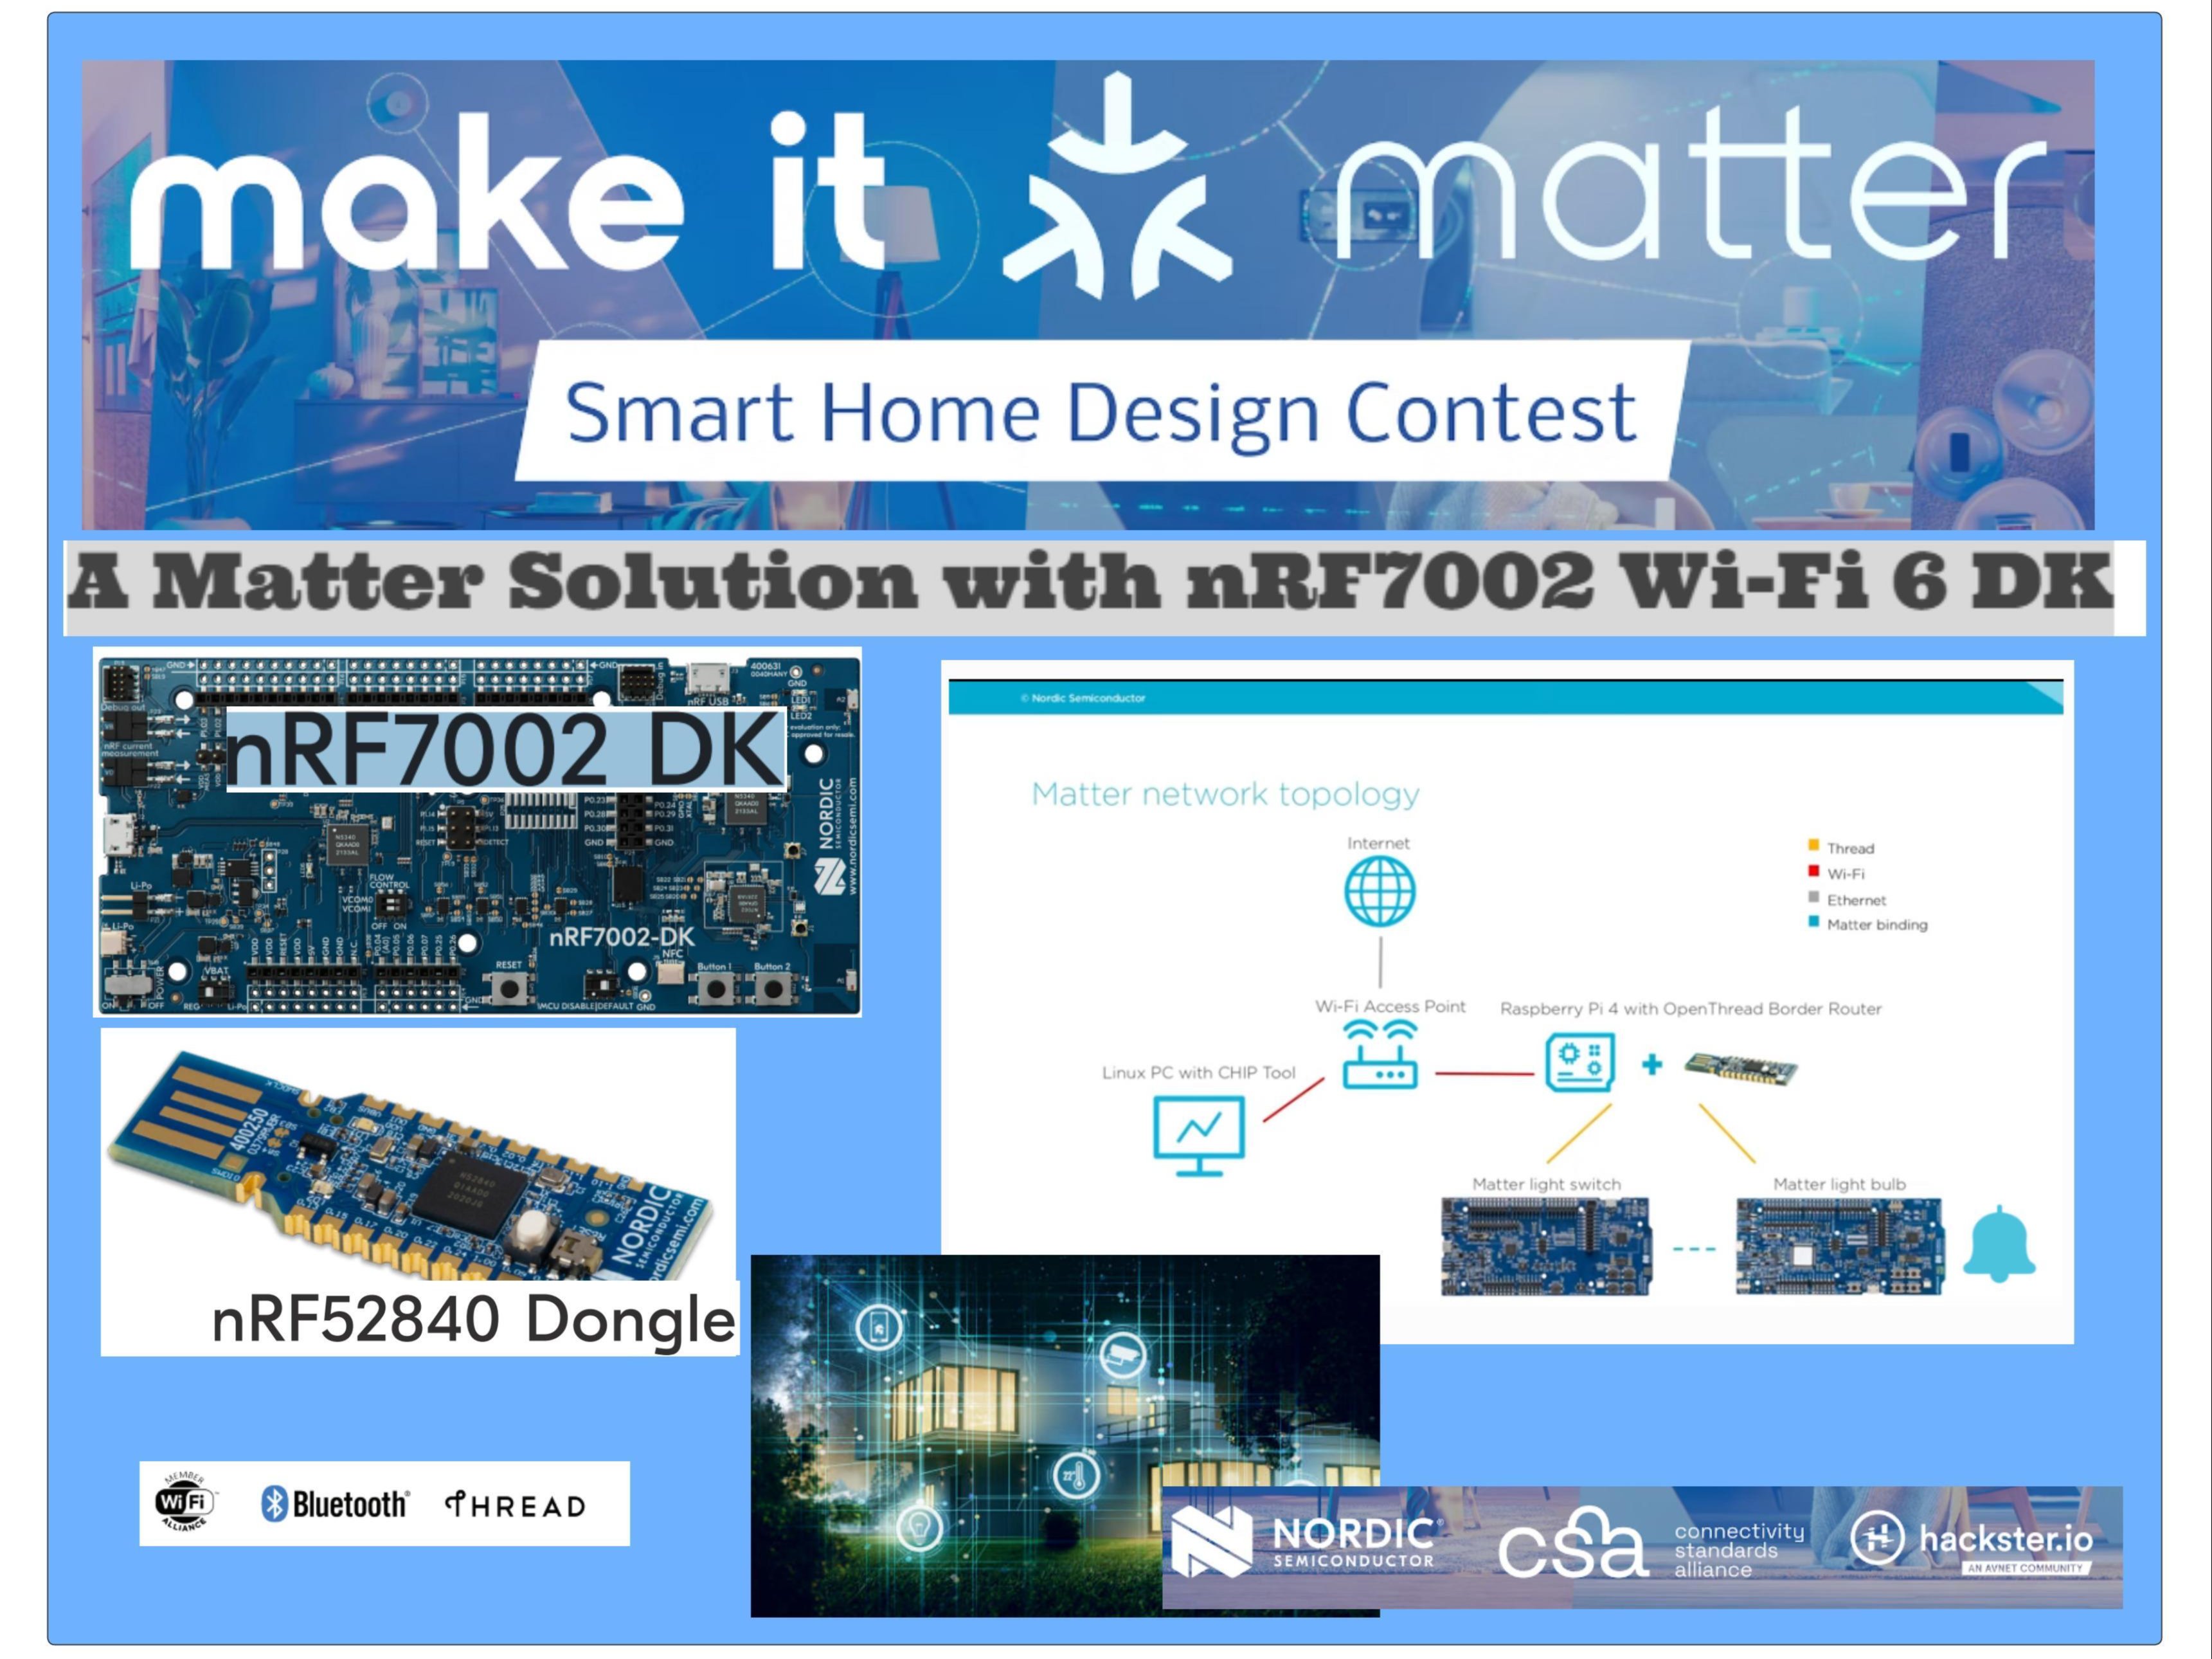 A Matter Solution with nRF7002 Wi-Fi 6 DK - Hackster.io